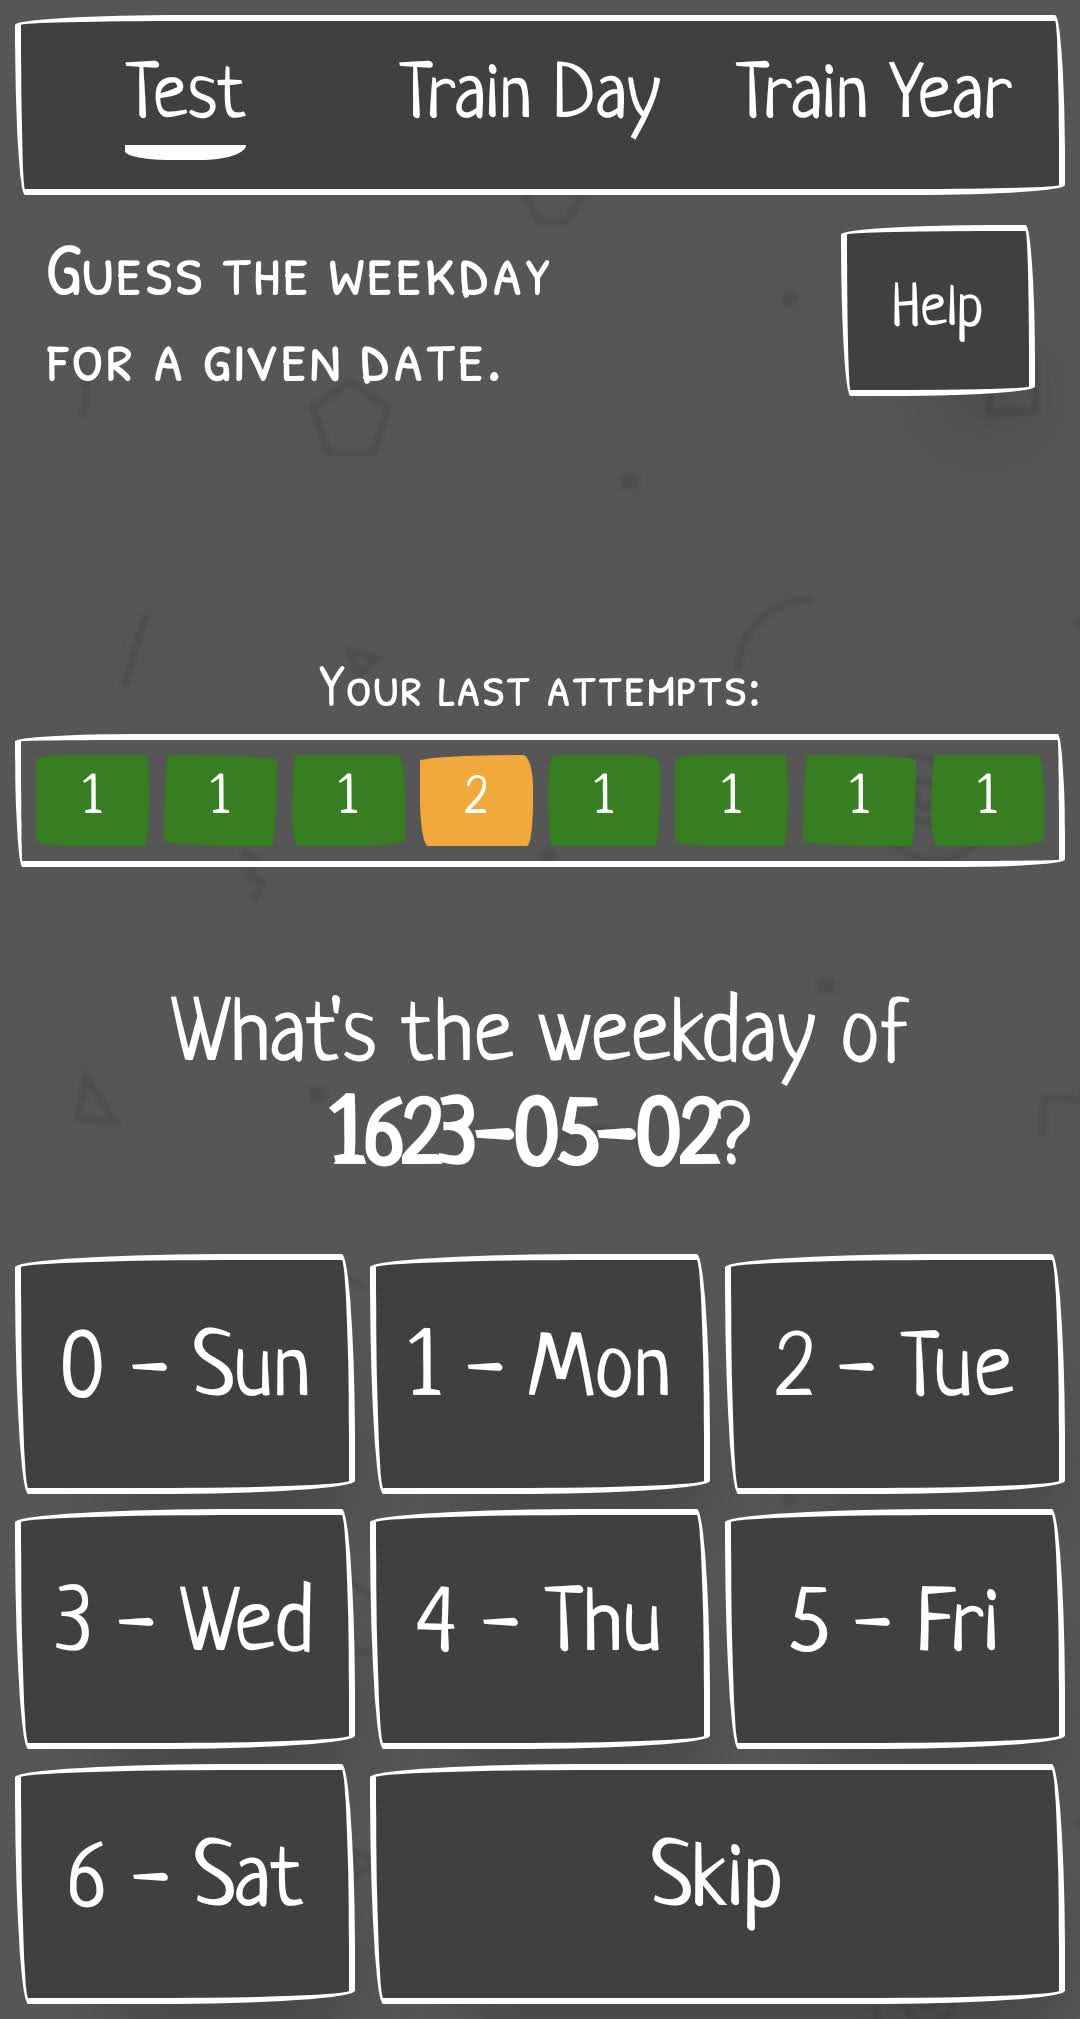 Test your skills by calculating the weekday of a given day